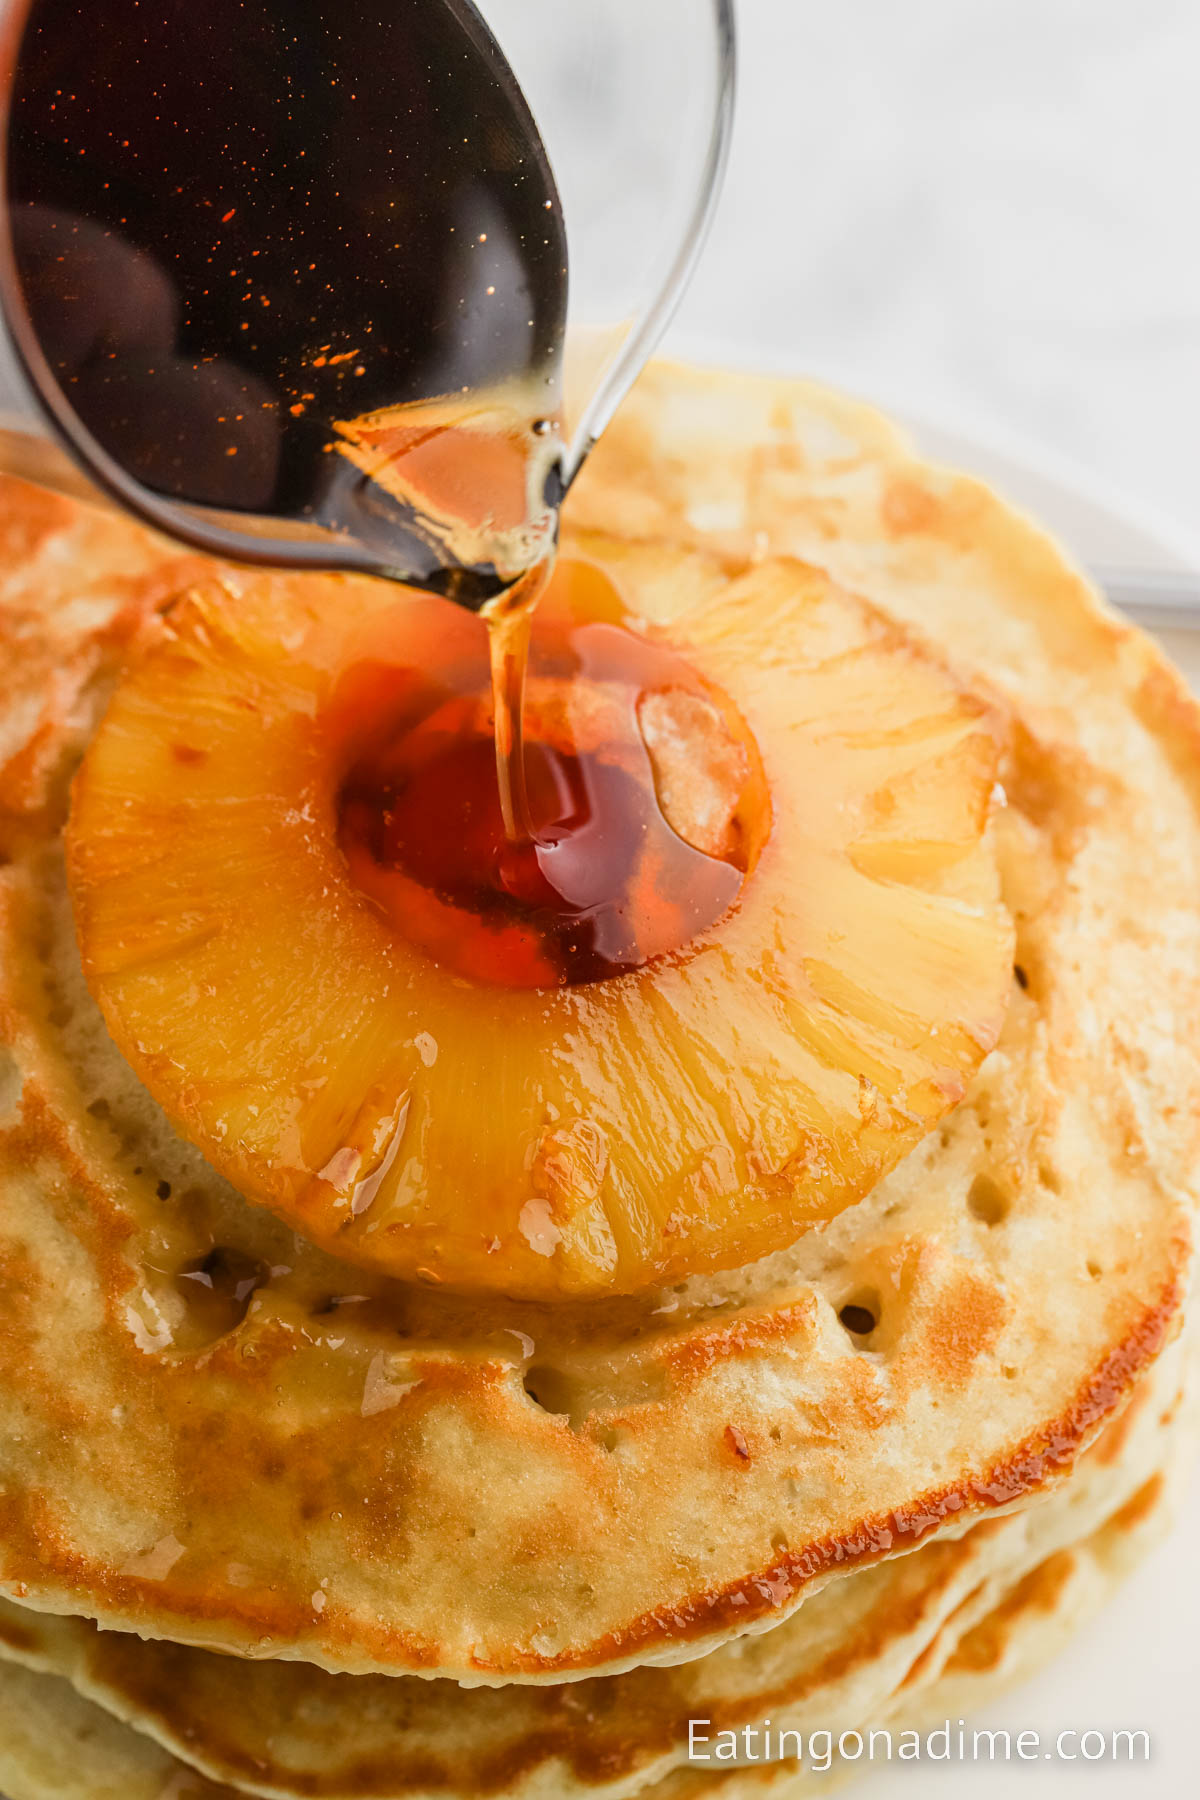 Pour syrup over pineapple upside down pancakes